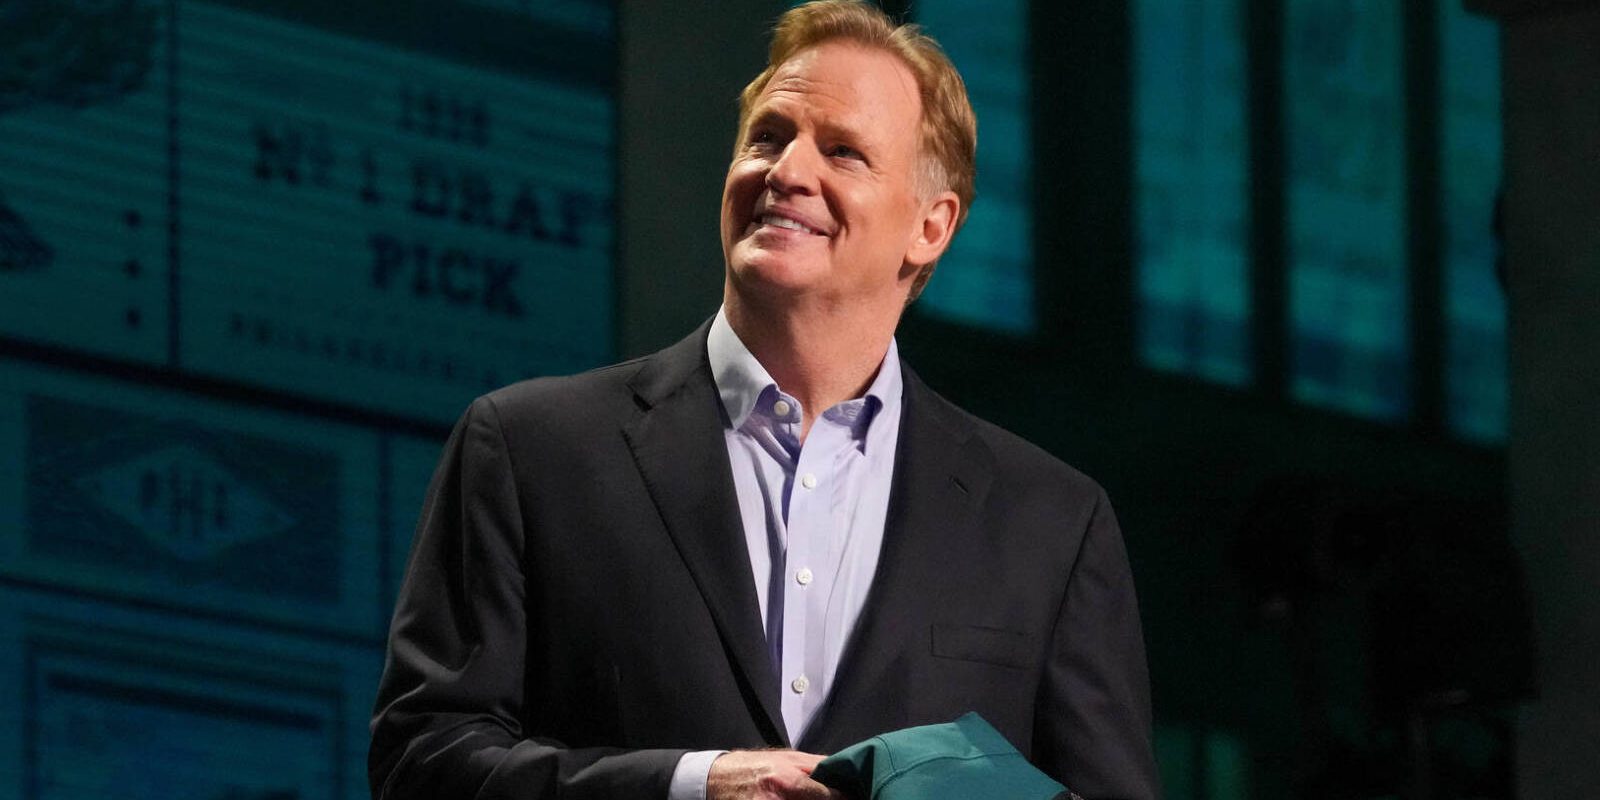 Apr 27, 2023; Kansas City, MO, USA; NFL commissioner Roger Goodell looks on after Georgia defensive lineman Jalen Carter (not pictured) was selected by the Philadelphia Eagles ninth overall in the first round of the 2023 NFL Draft at Union Station. Mandatory Credit: Kirby Lee-USA TODAY Sports